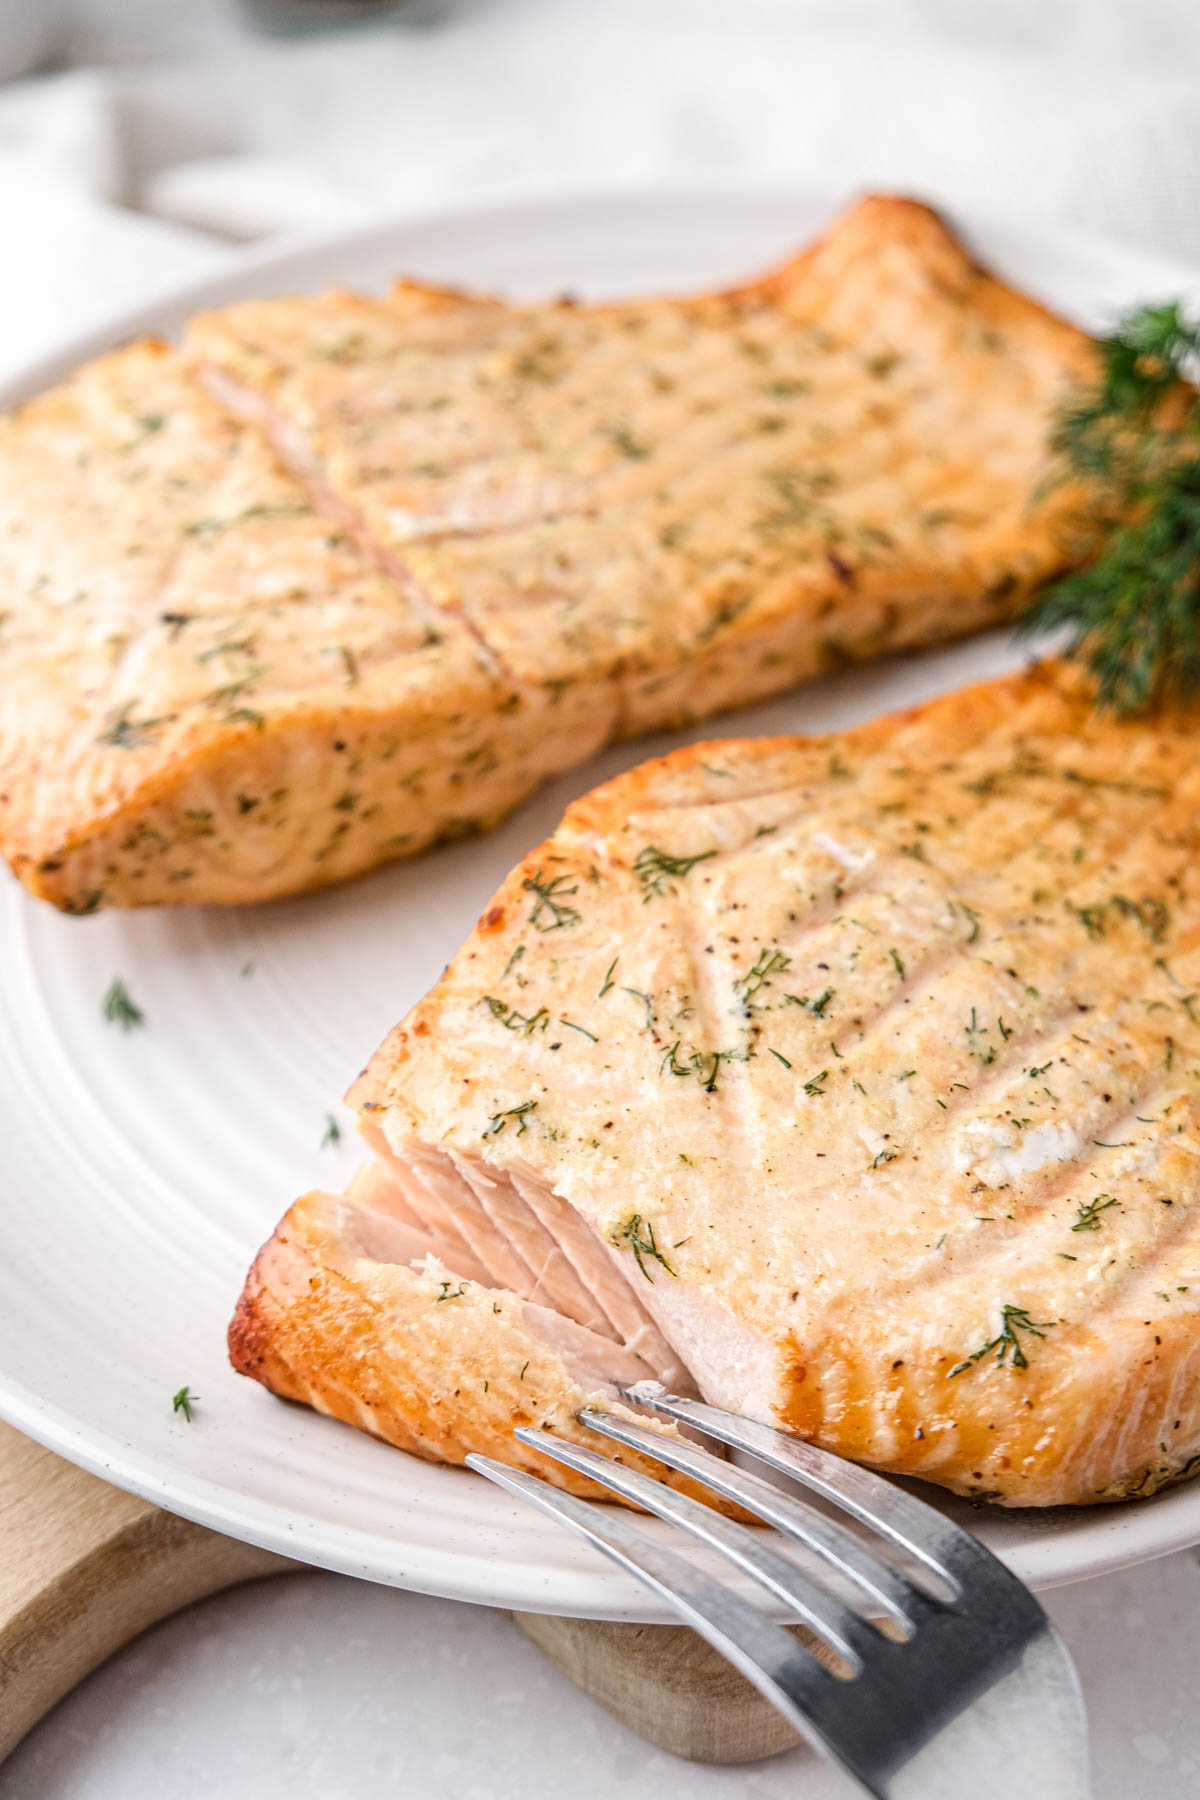 two fillets of cooked salmon with dill on top sitting on white plate with silver fork.